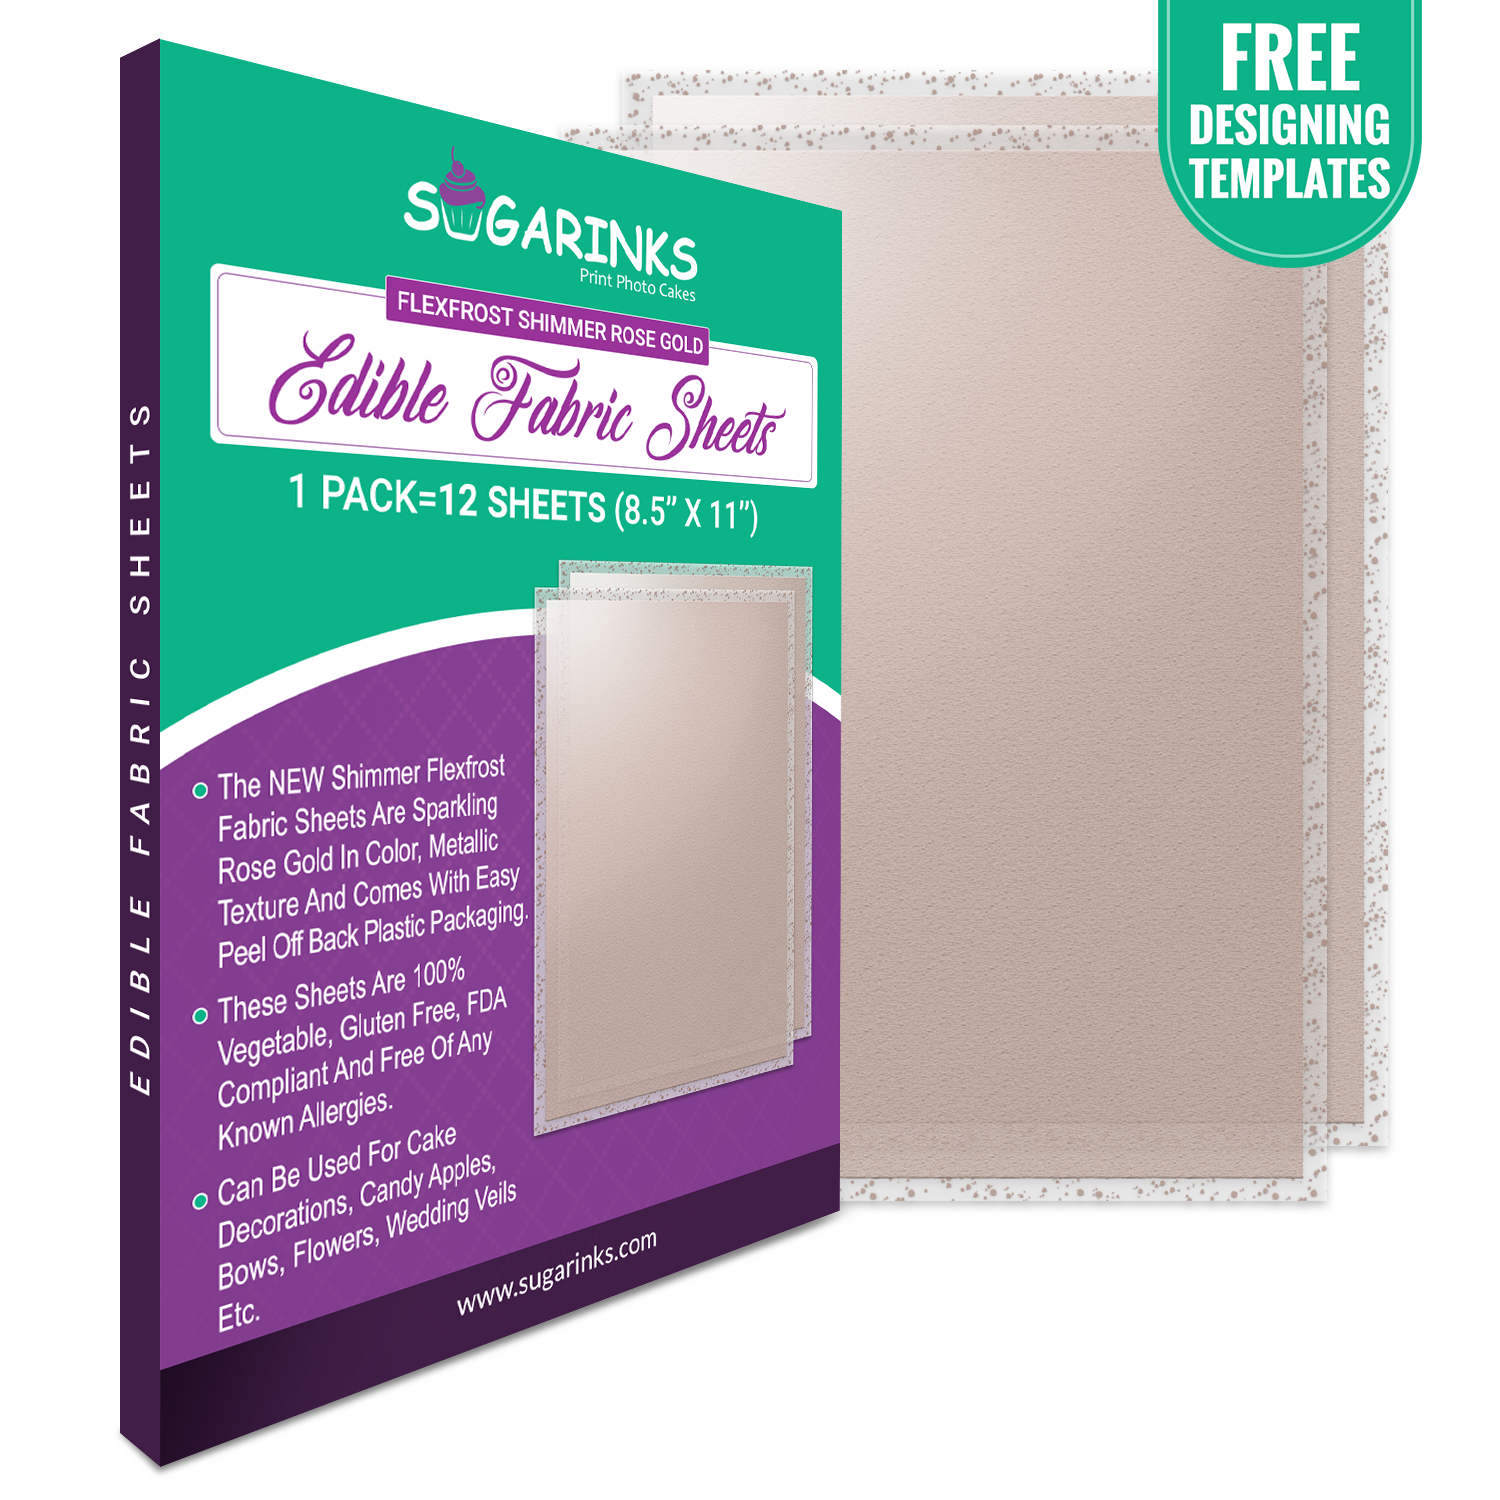 Sugarinks Premium Quality Flexfrost Shimmer Edible Fabric Sheets A4 Size (8.5”X11”) Pack of 12 – Sparkling Rose Gold